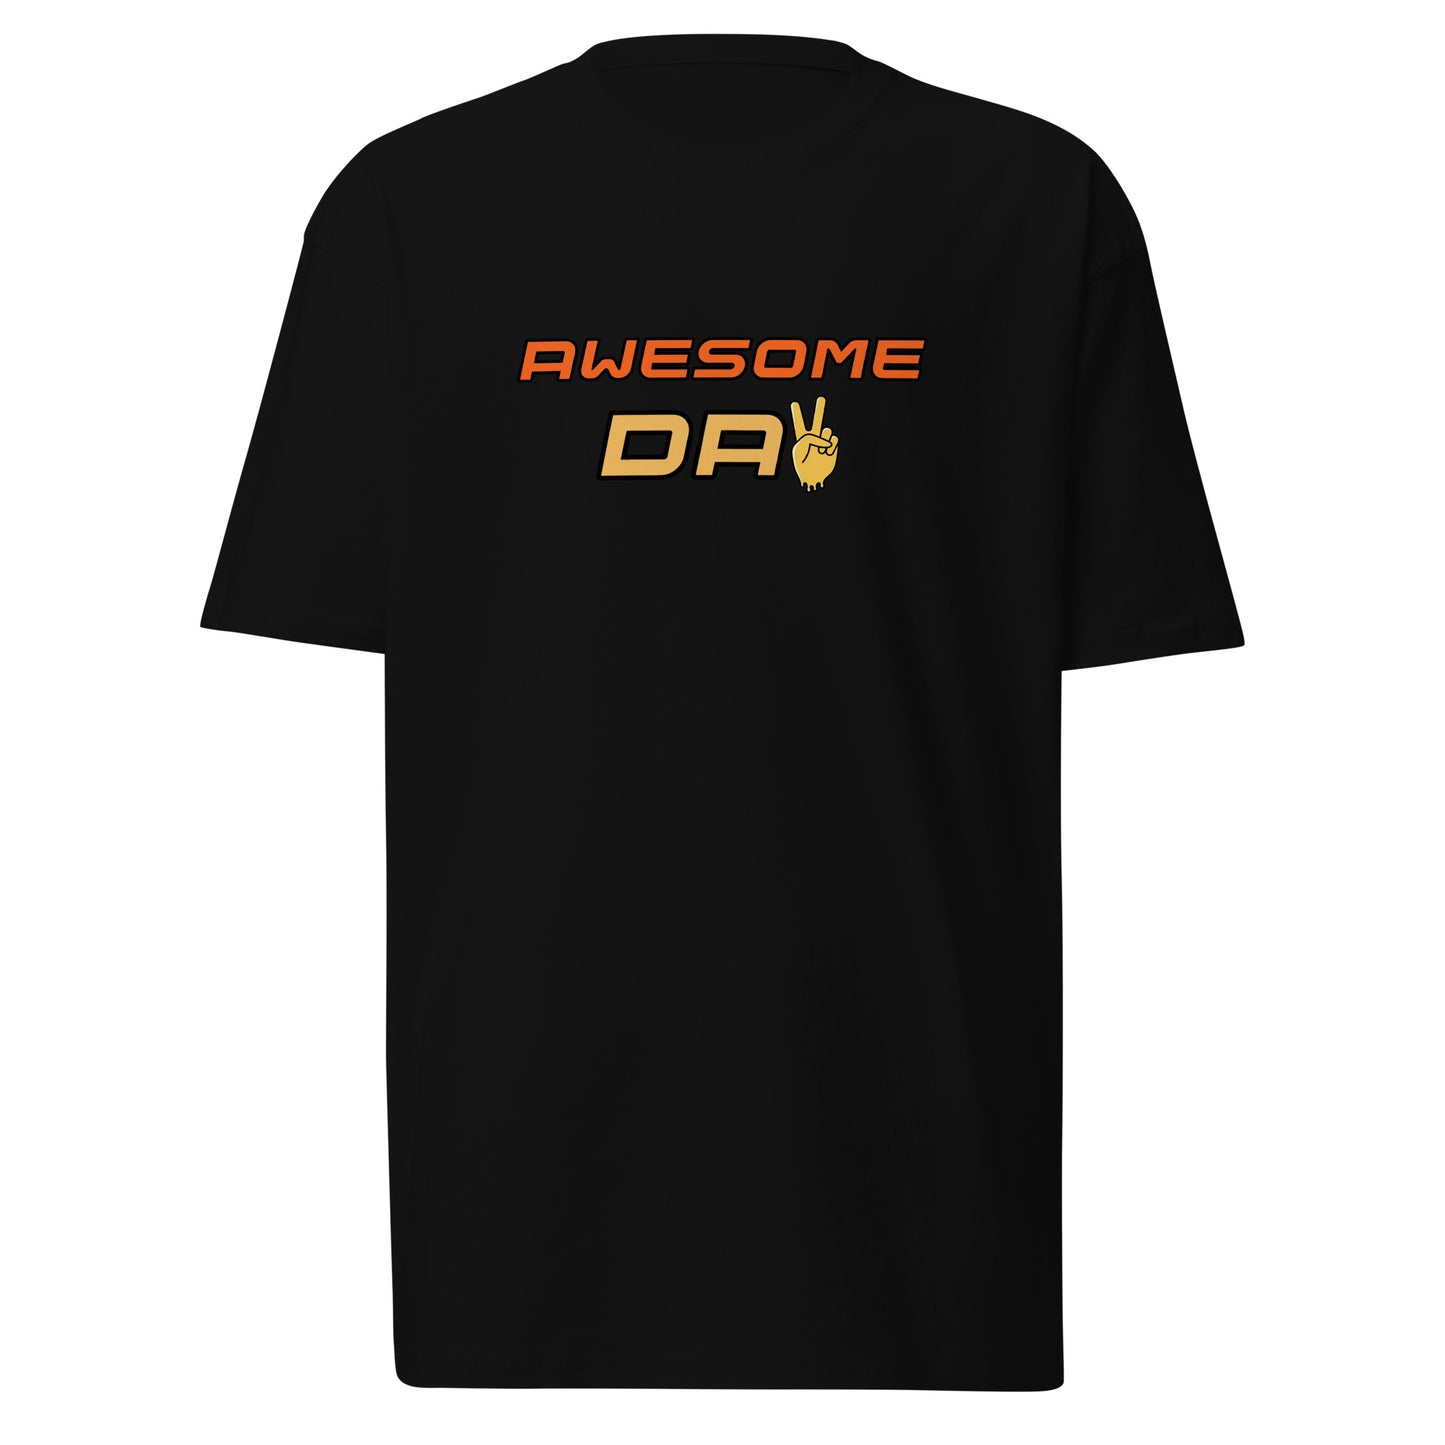 Unisex Cotton Black T-shirt, short sleeve, awesome day, S-4XL